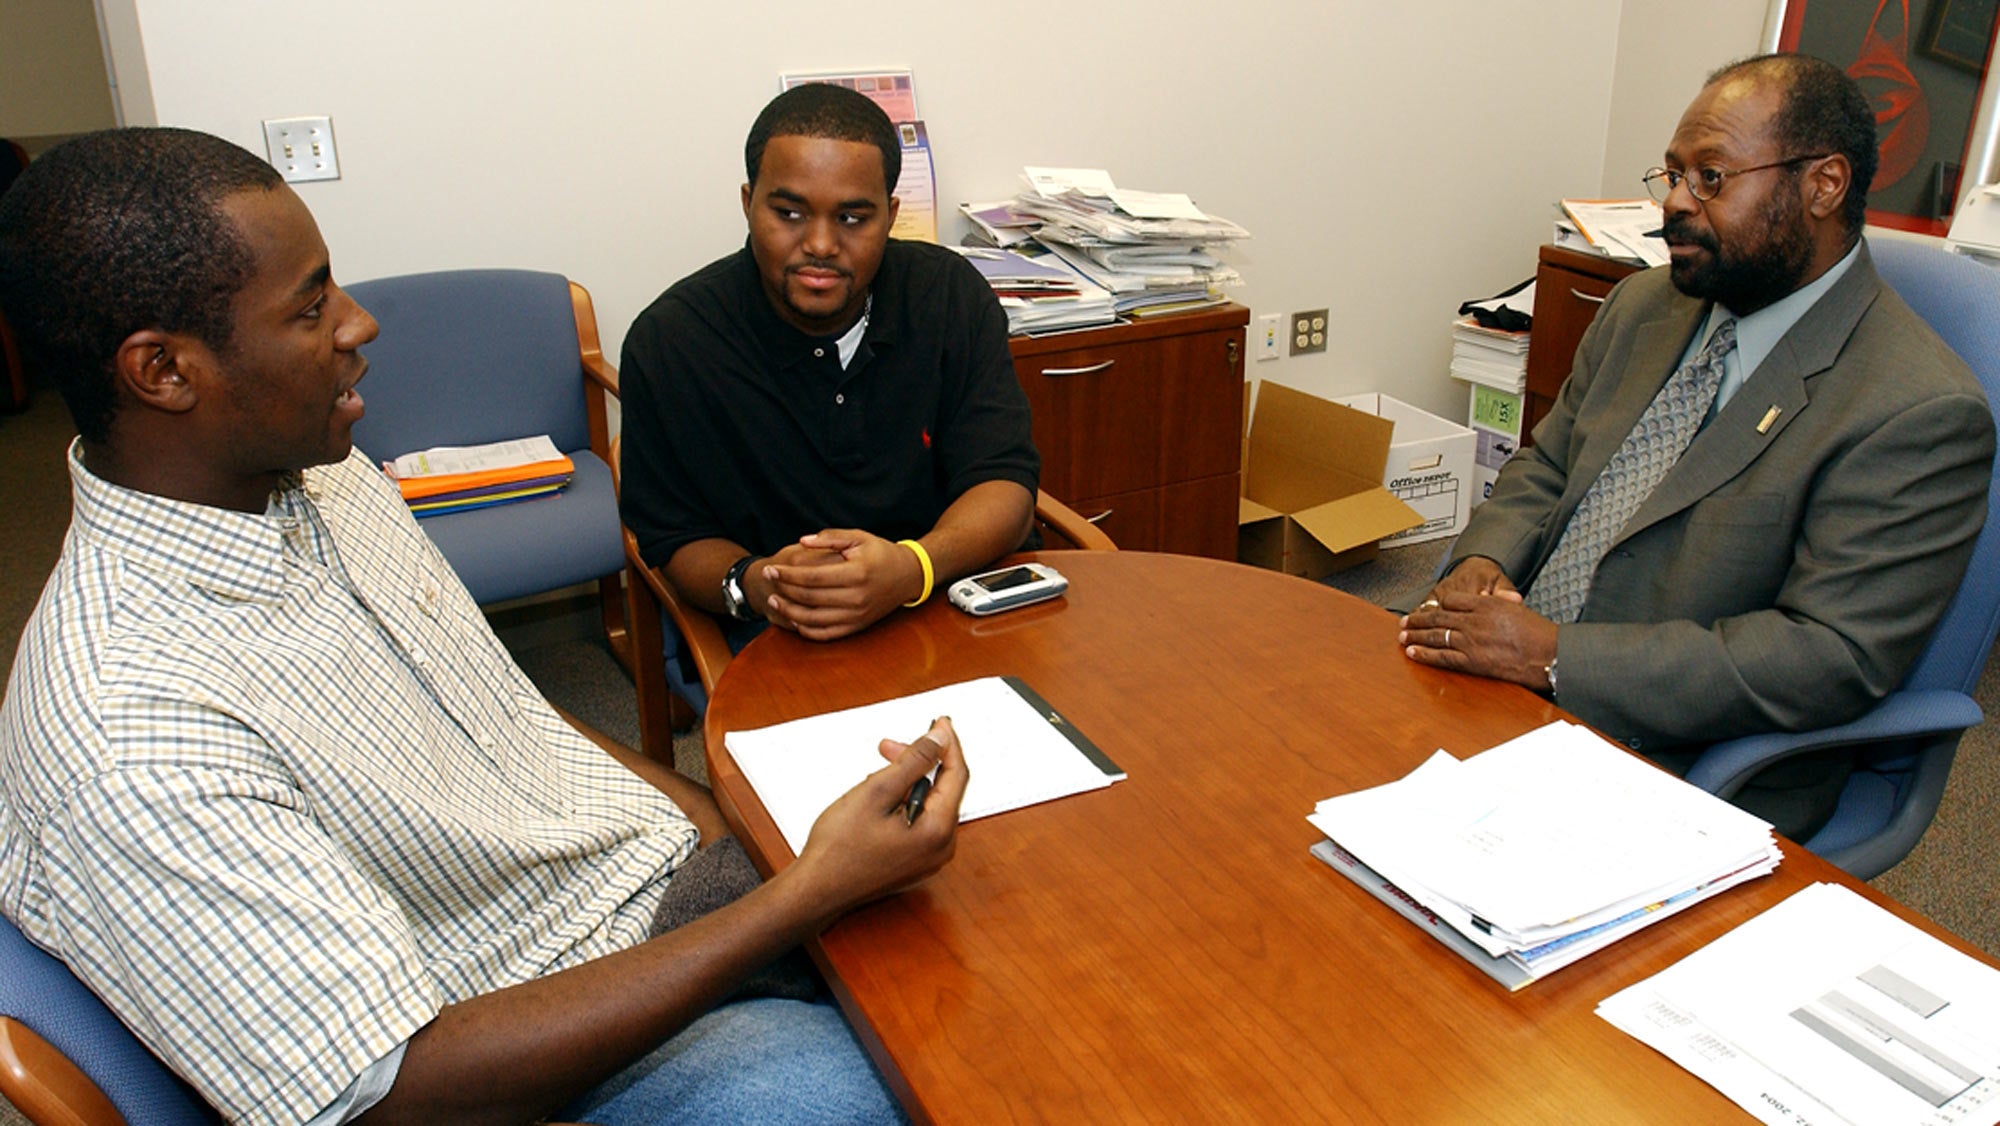 Reed and two students, in discussion, at a table